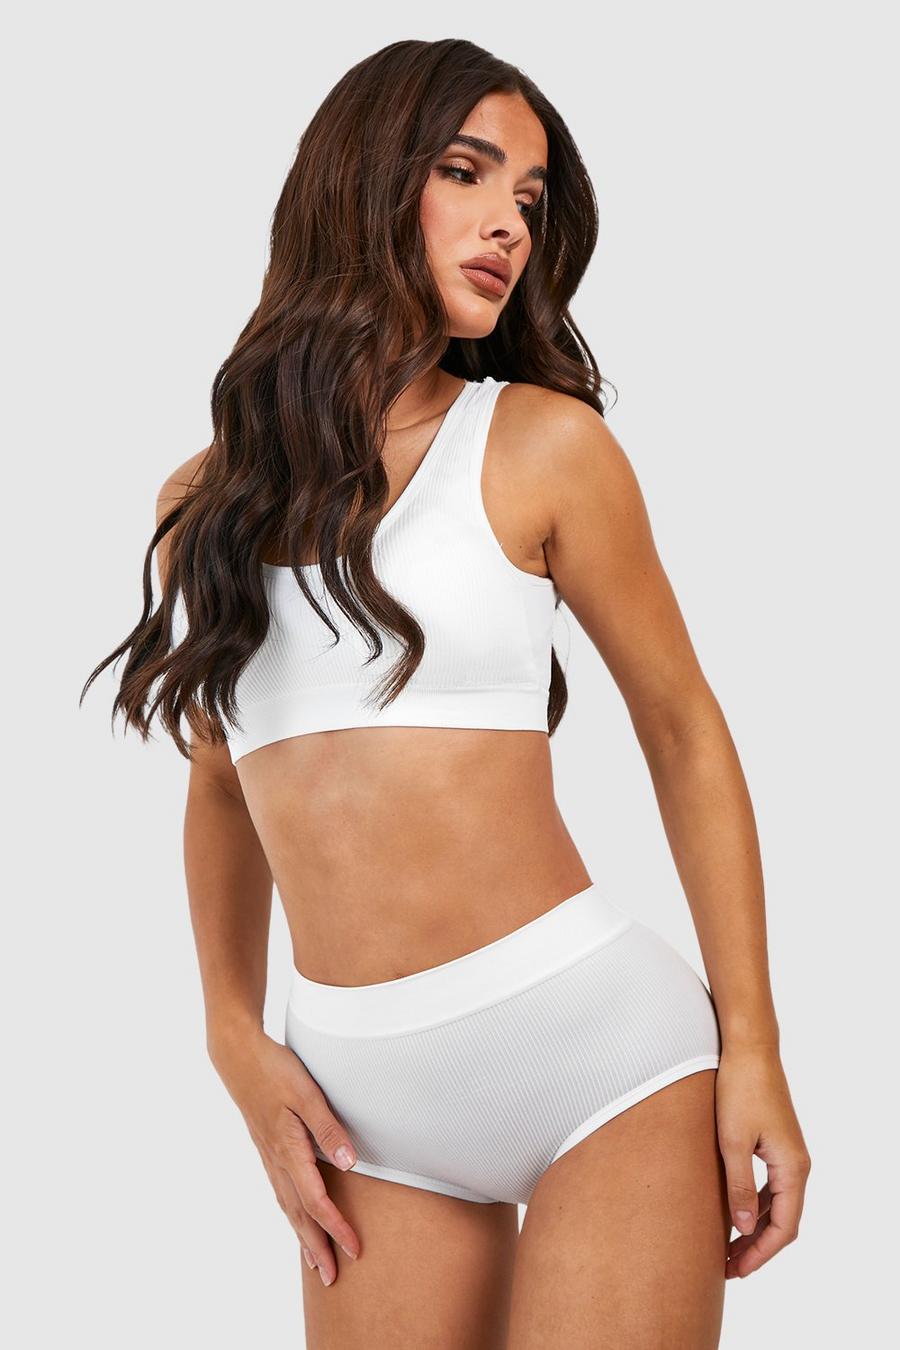 Boohoo Women's Underwear & Lingerie Lot - Assorted - Various Styles, Colors  & Sizes - Budget-Friendly - Spain, New - The wholesale platform